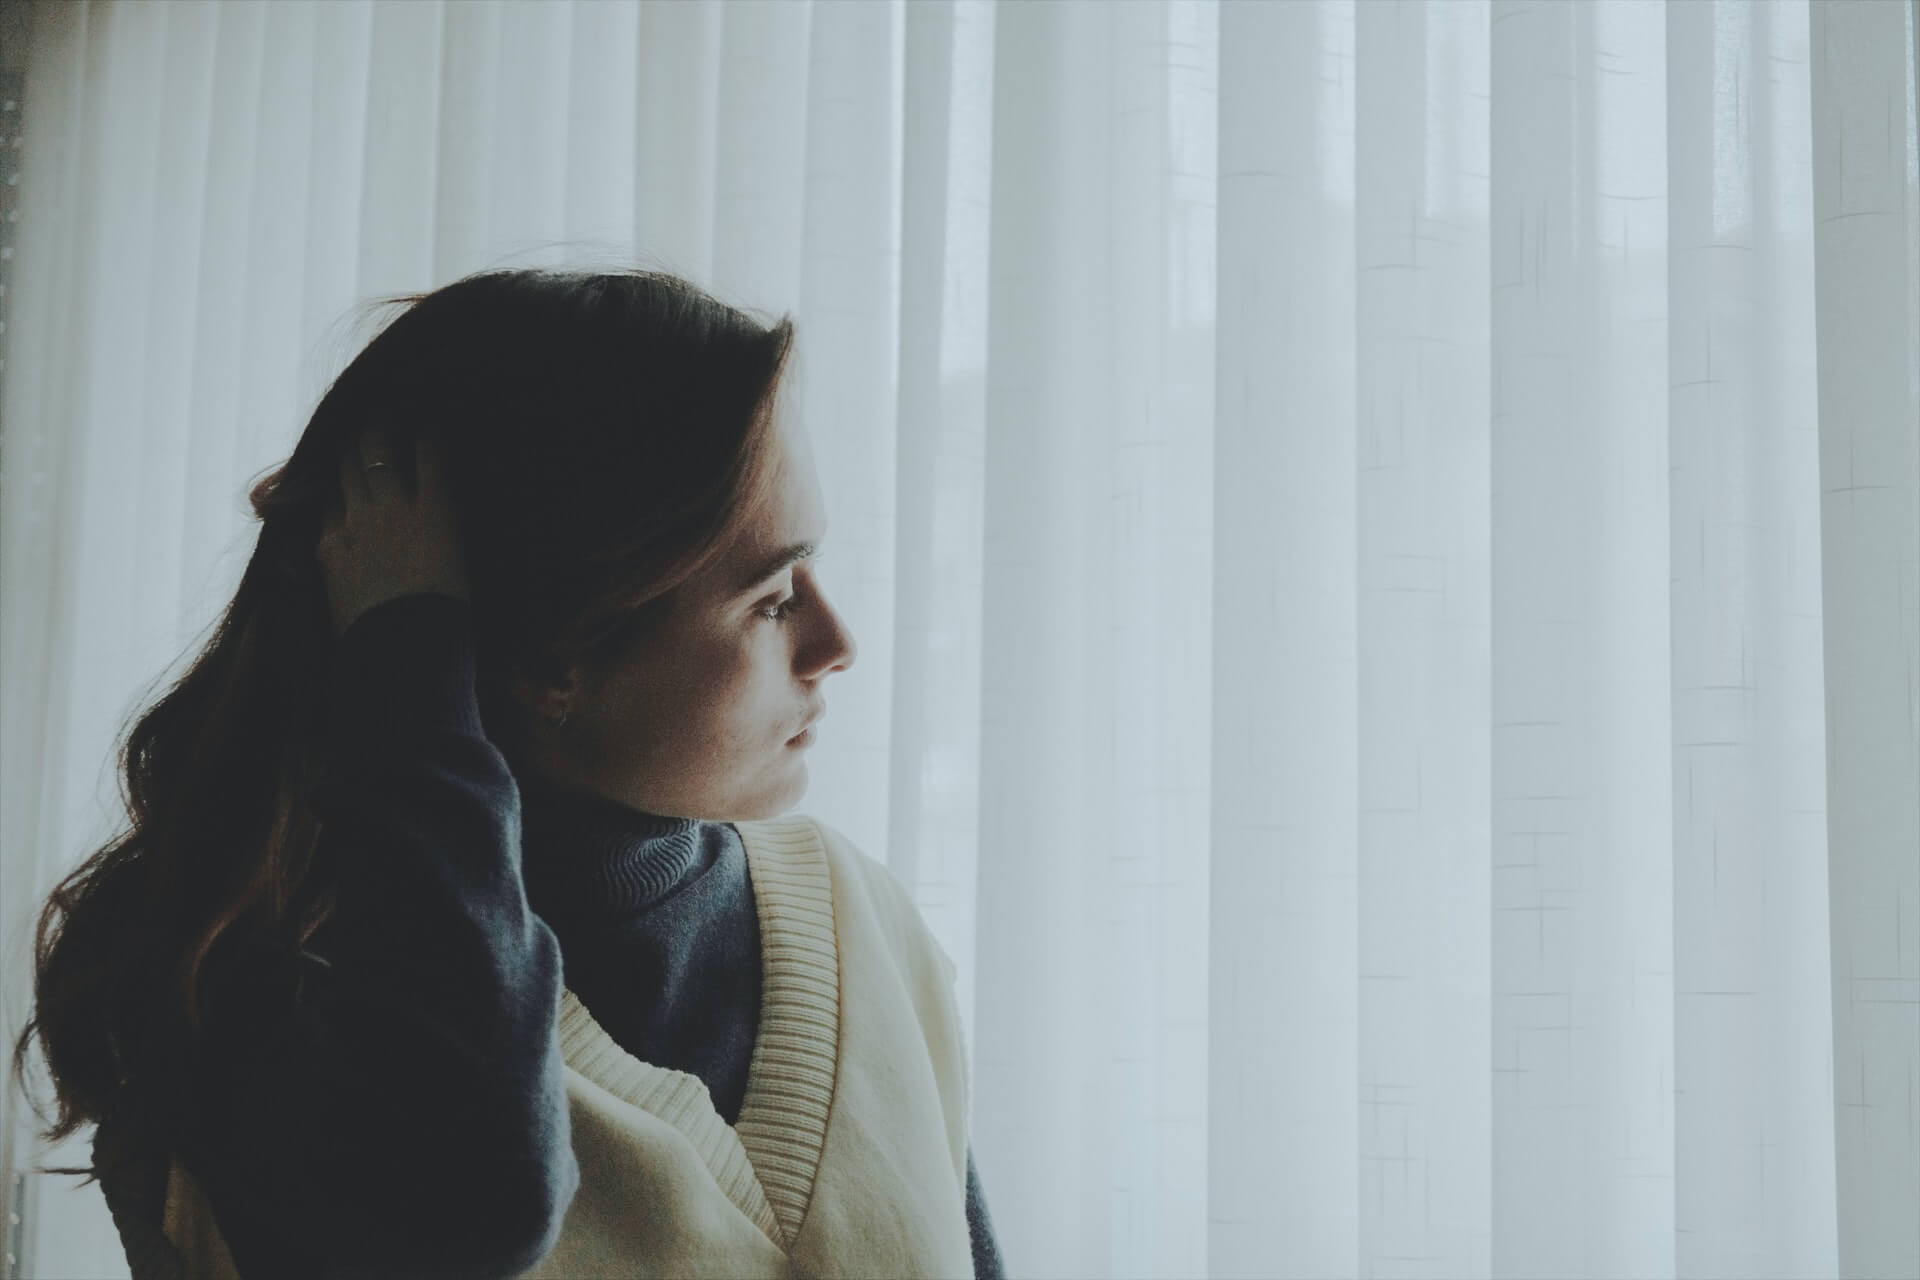 A woman look contemplative next to a window